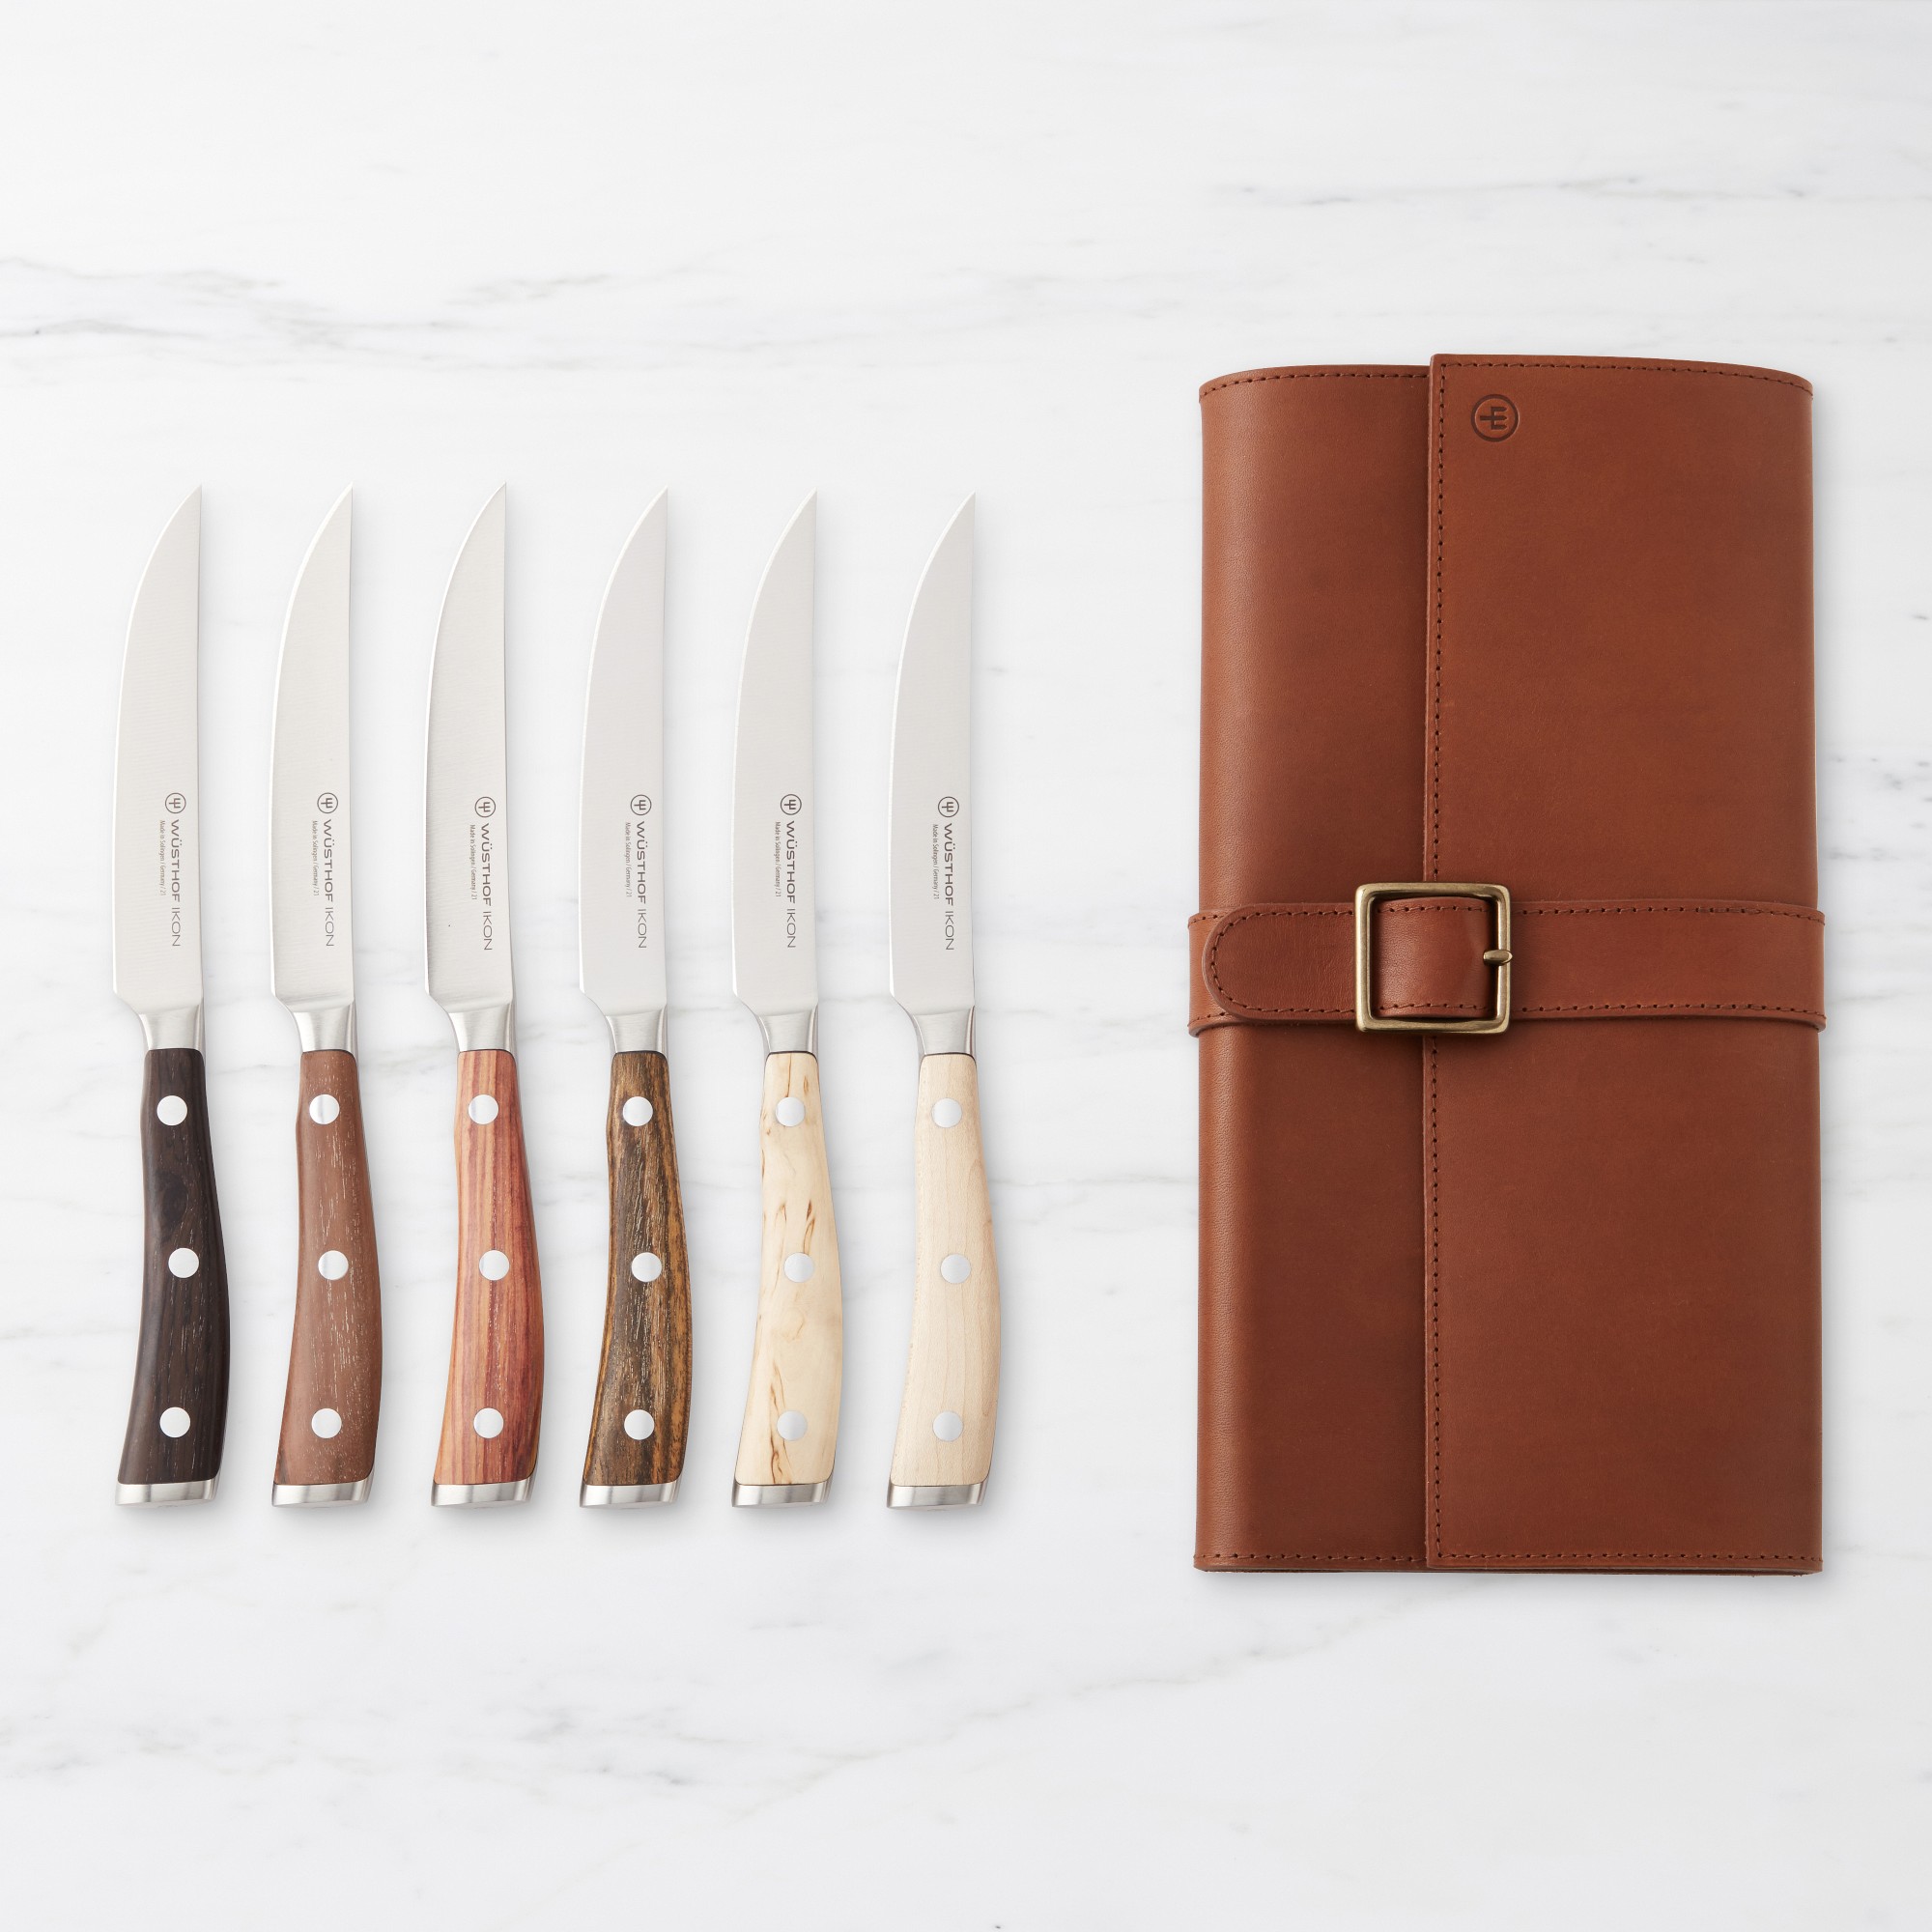 Wüsthof Ikon Mixed Wood Steak Knives with Leather Knives Roll, Set of 6